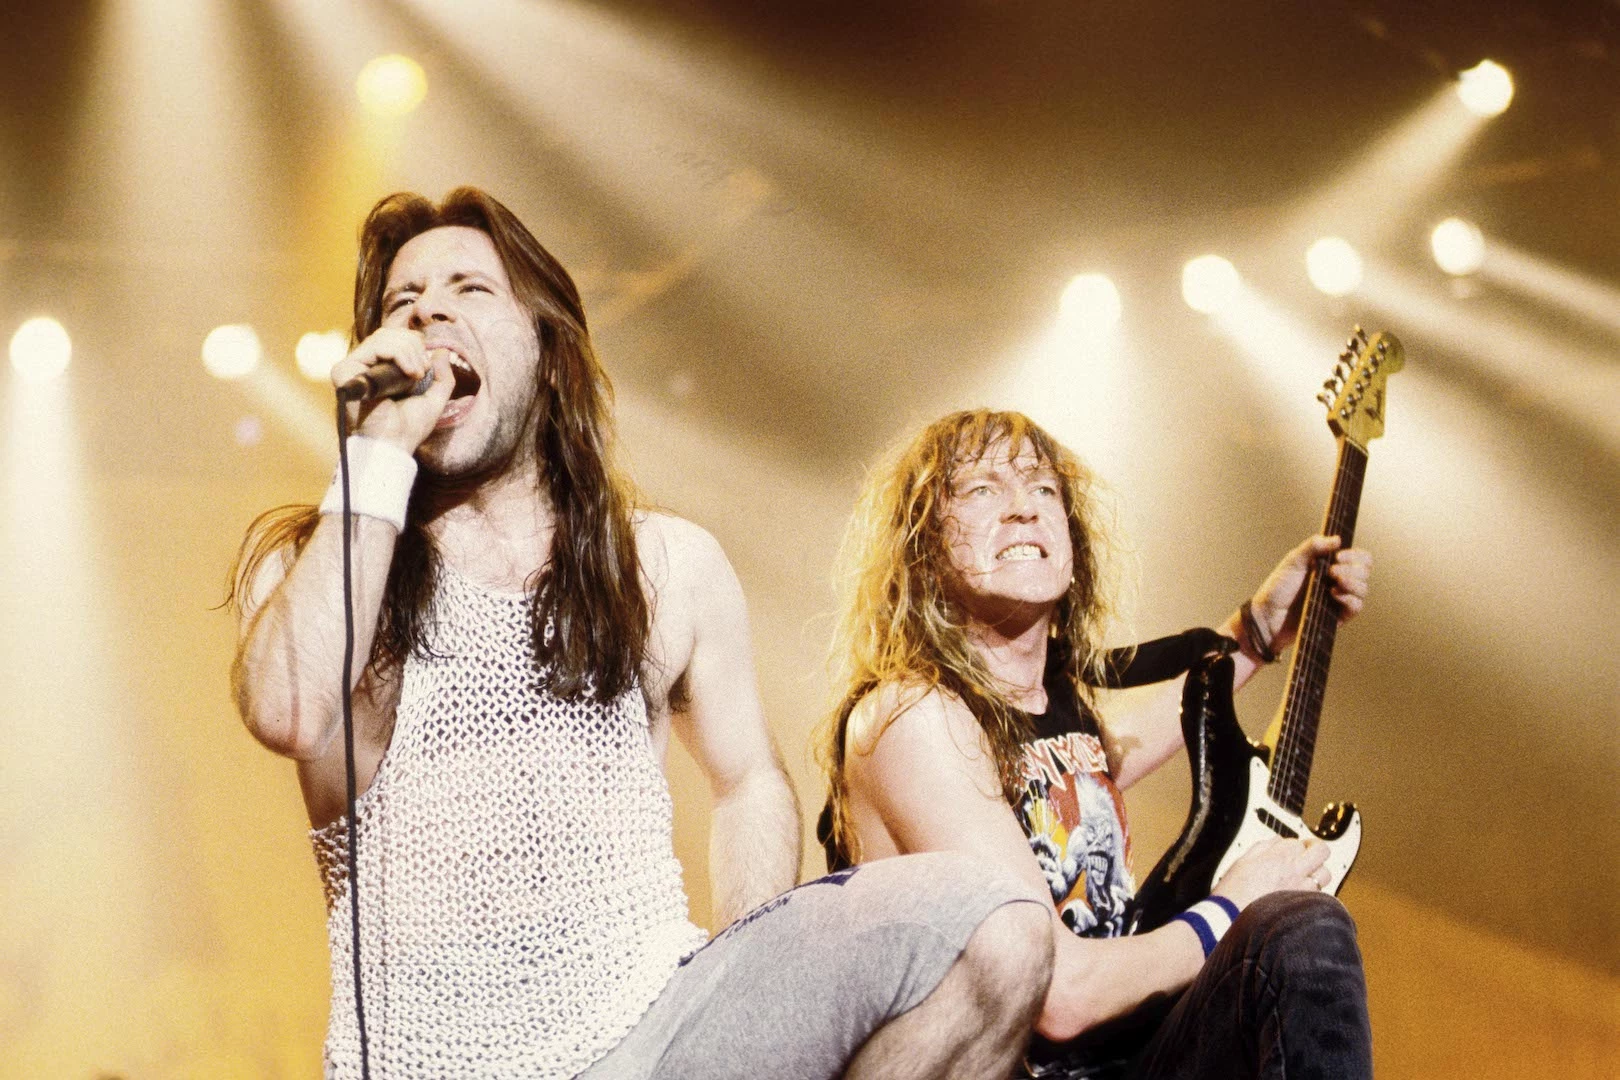 Why Did Bruce Dickinson Leave Iron Maiden in the '90s?